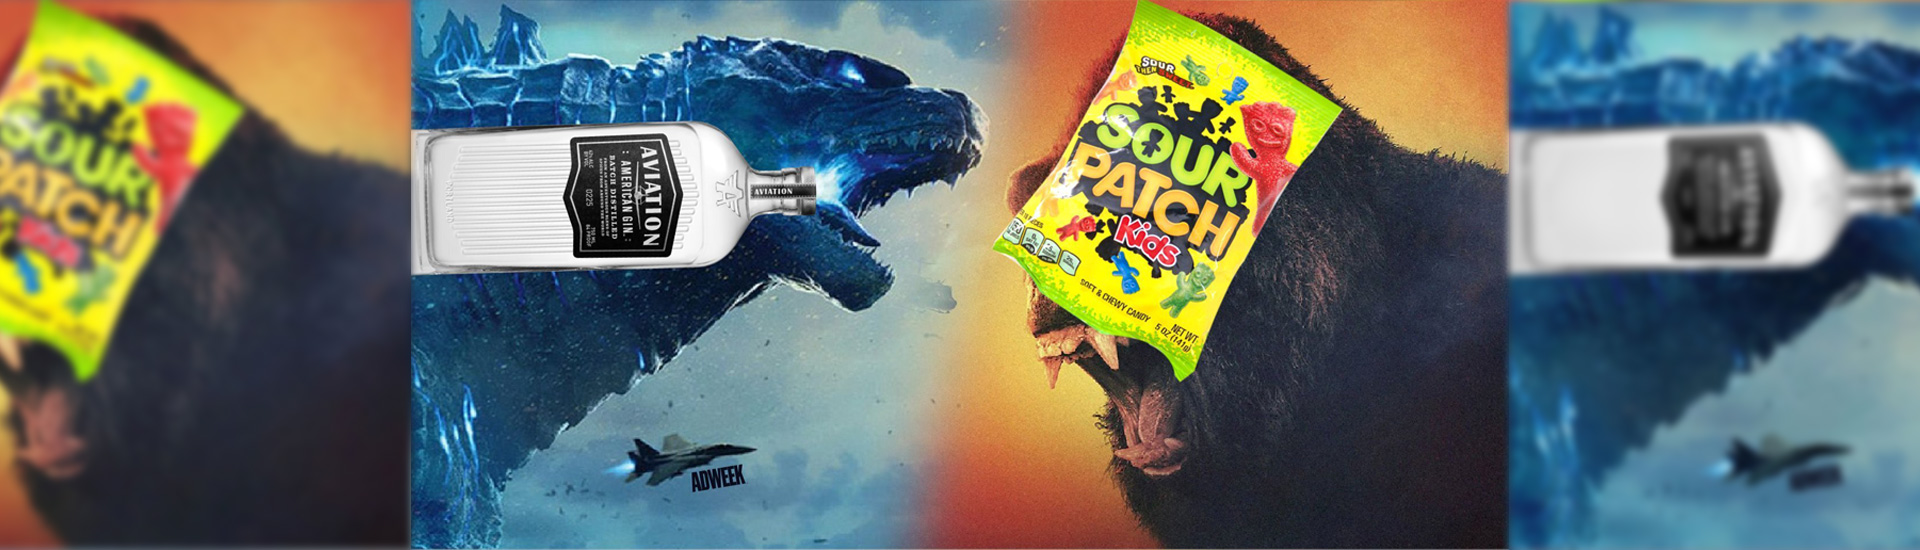 aviation gin vs sour patch